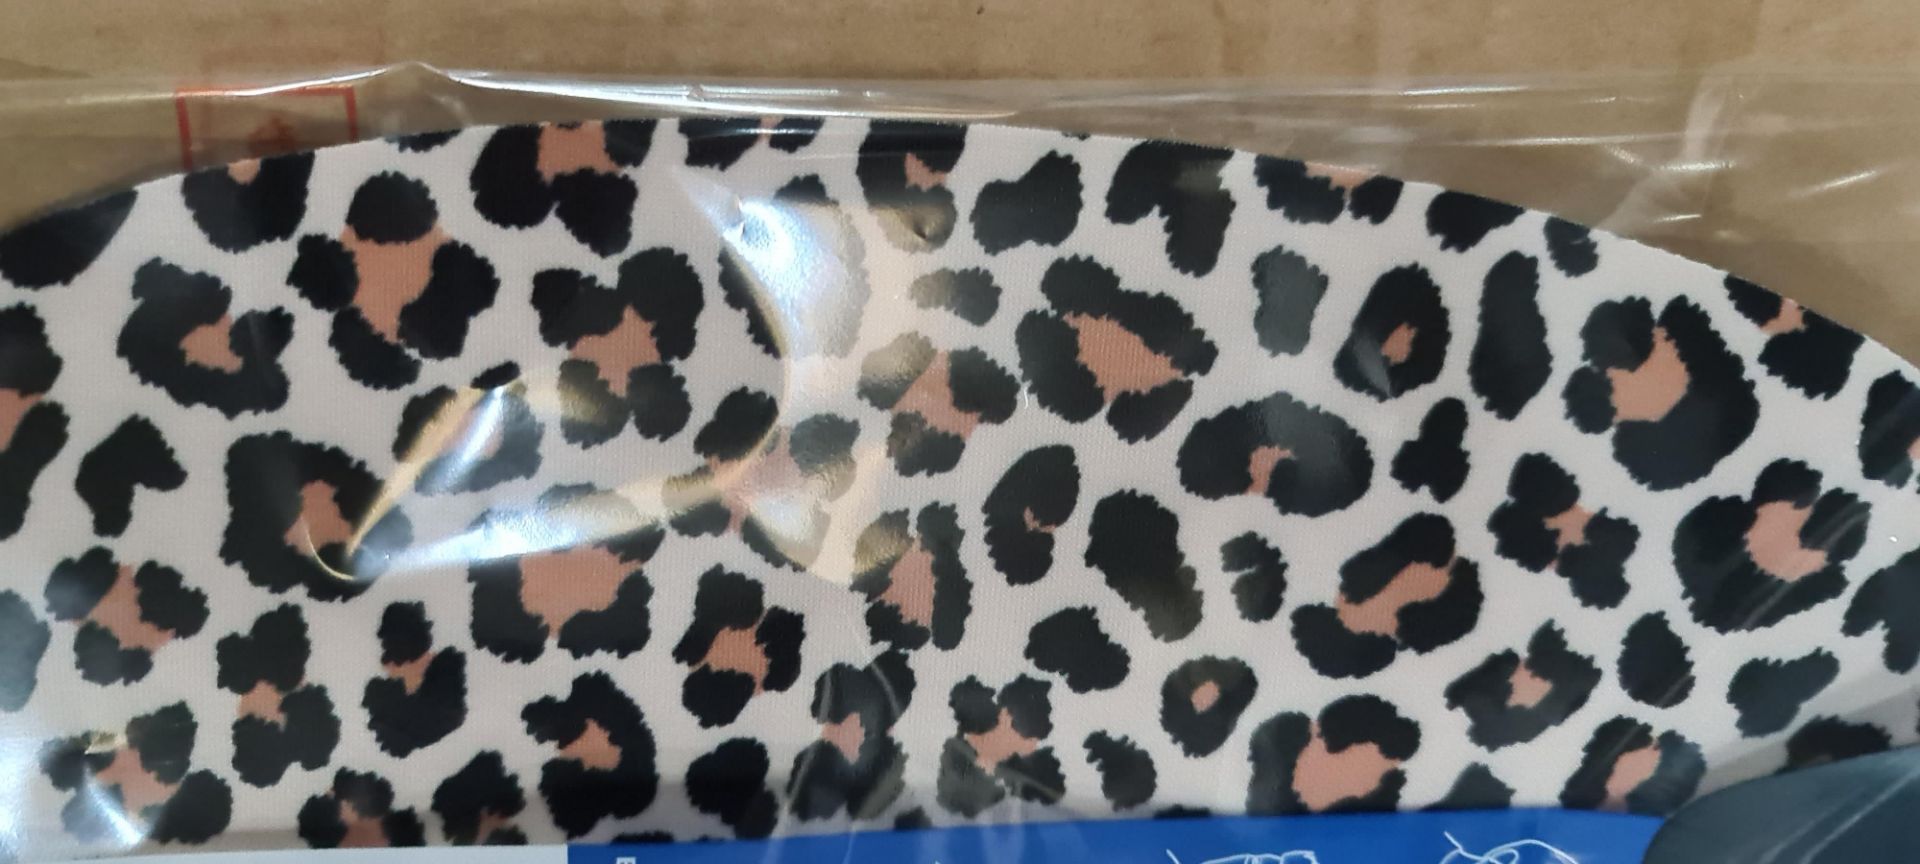 100 off adult face masks, individually packaged, in leopard print - Image 3 of 7